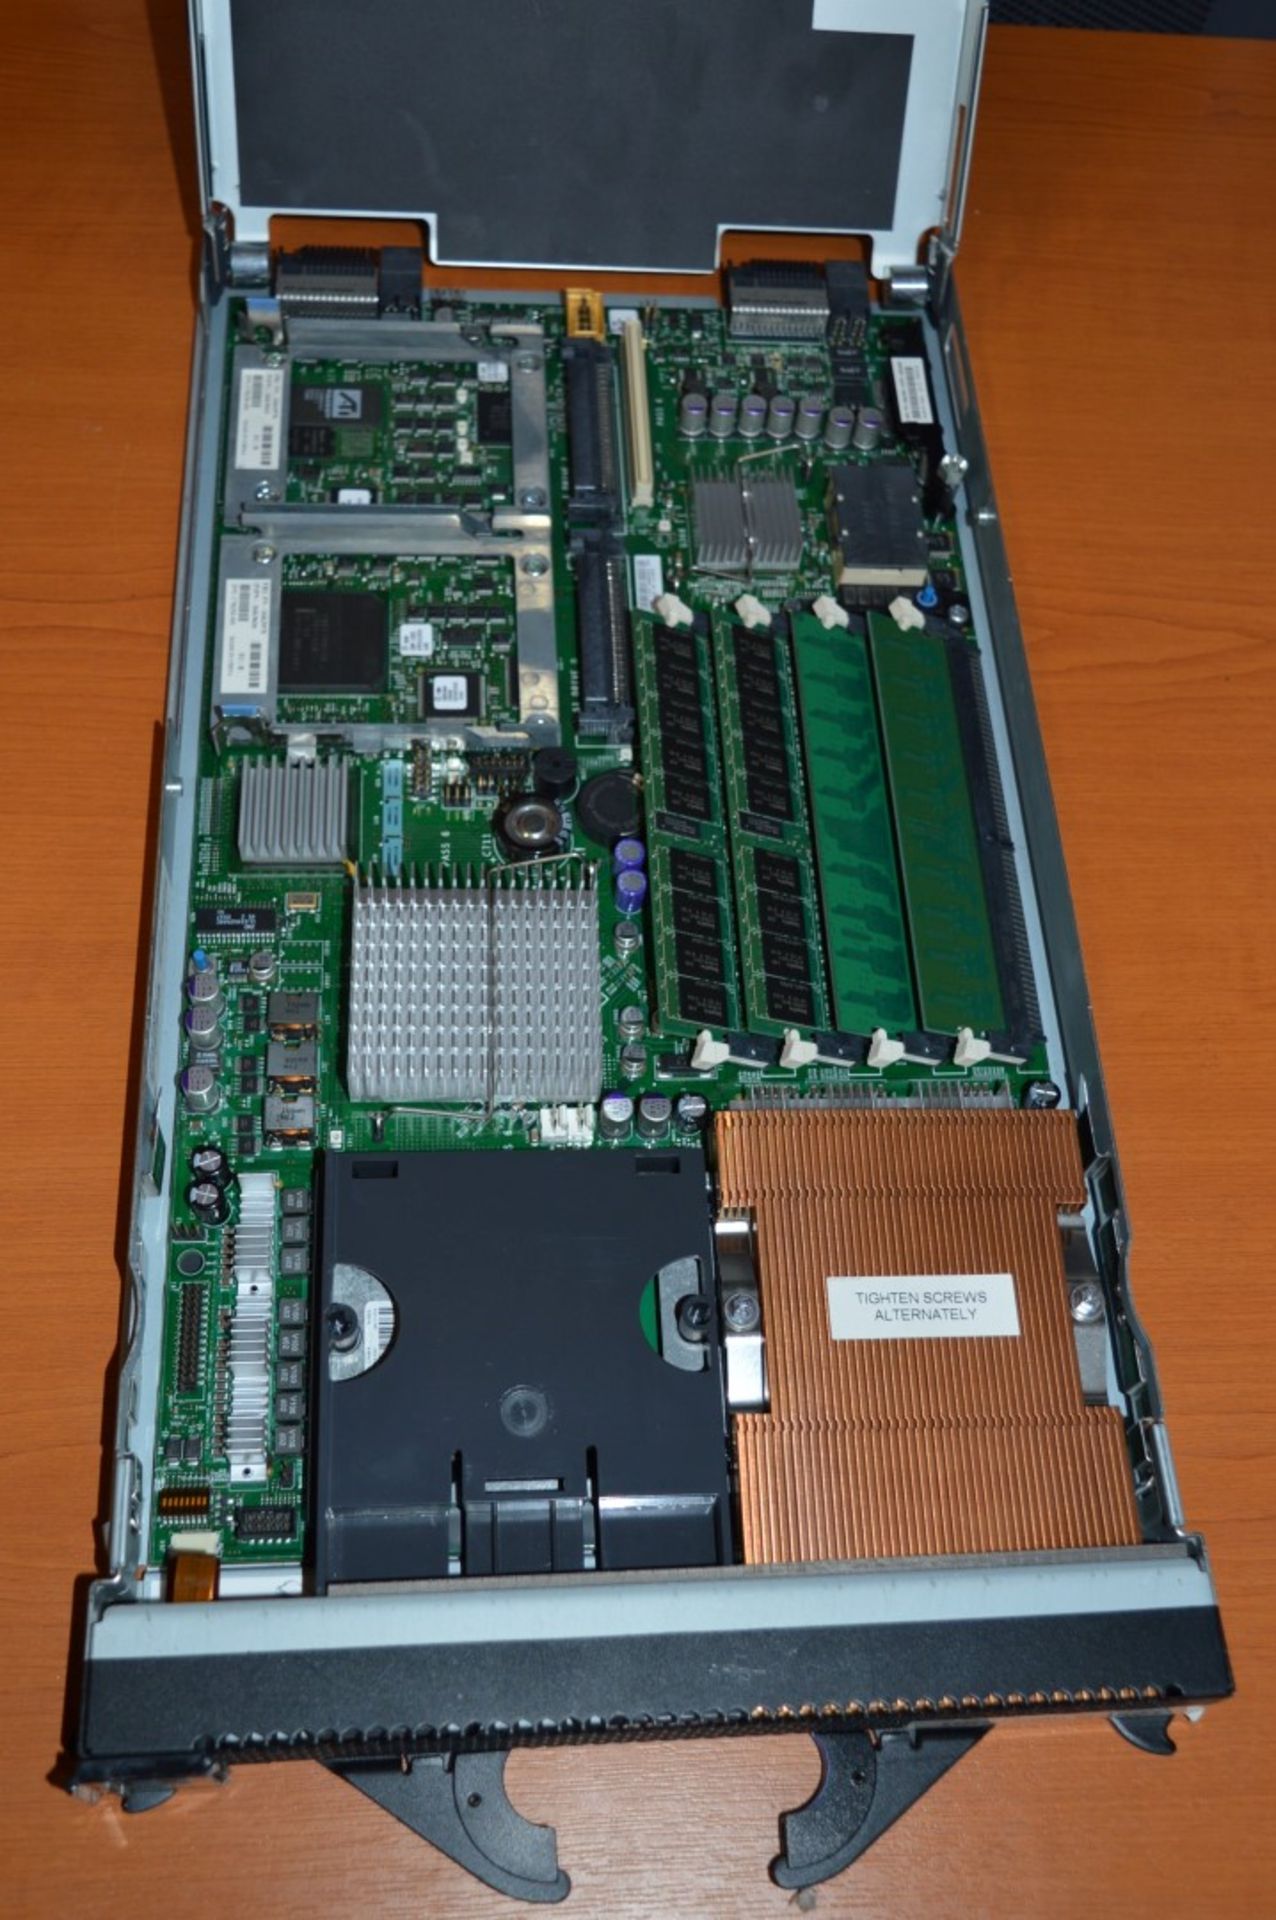 1 x IBM HS20 Blade Server - Model 35G - Includes 1 x Xeon Processors and 3gb Ram - CL400 - Ref JP607 - Image 2 of 4